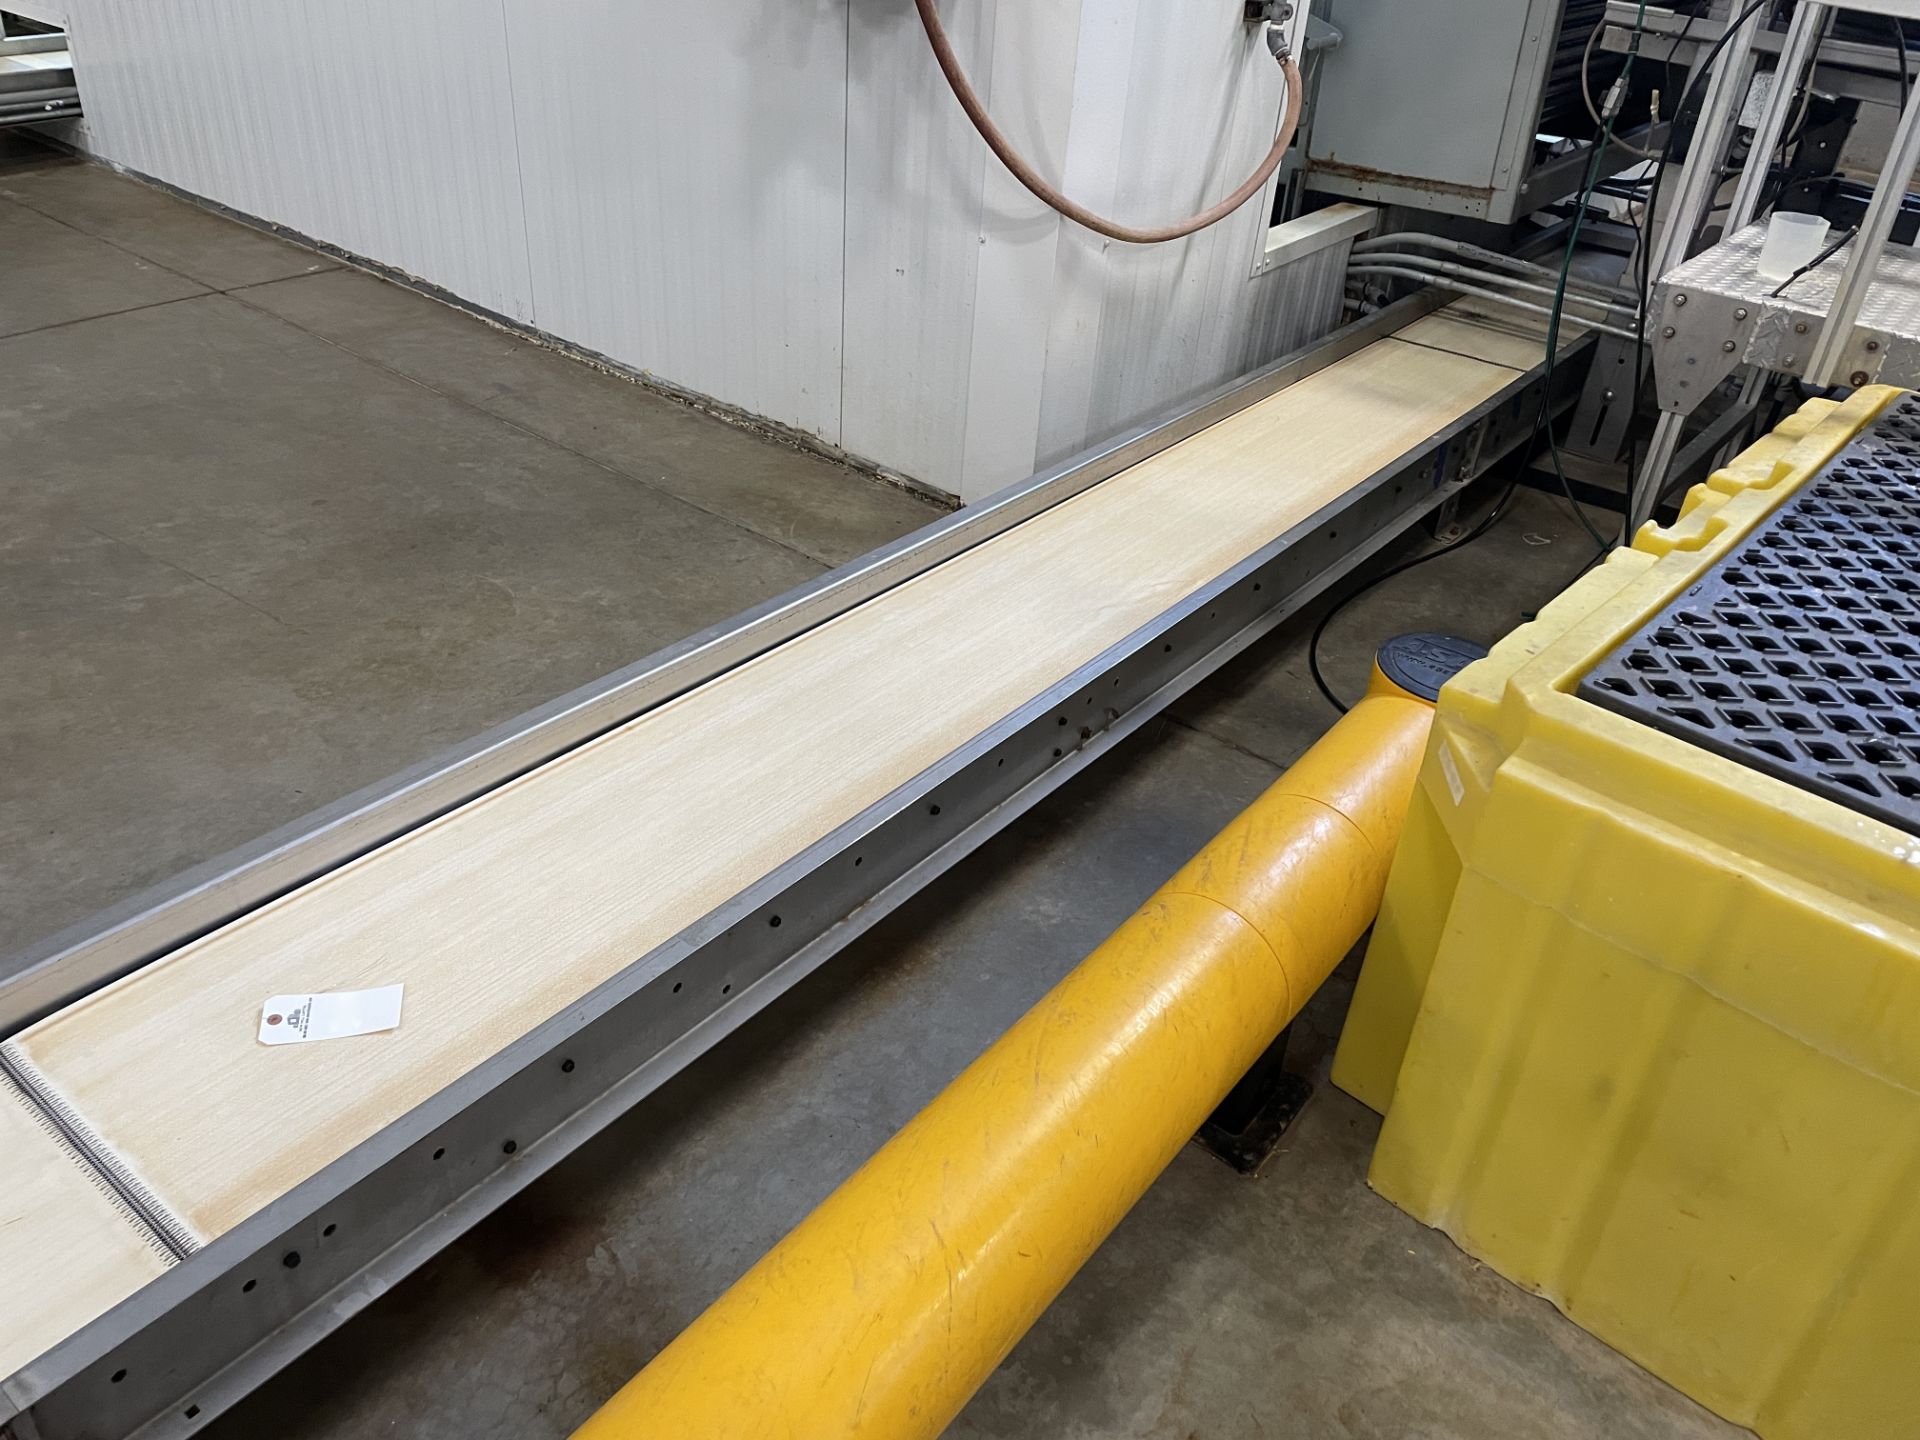 Powered Belt Reject Conveyor, Approx Dims: 16in W x 50ft OAL - Subj to Bulk | Rig Fee $800